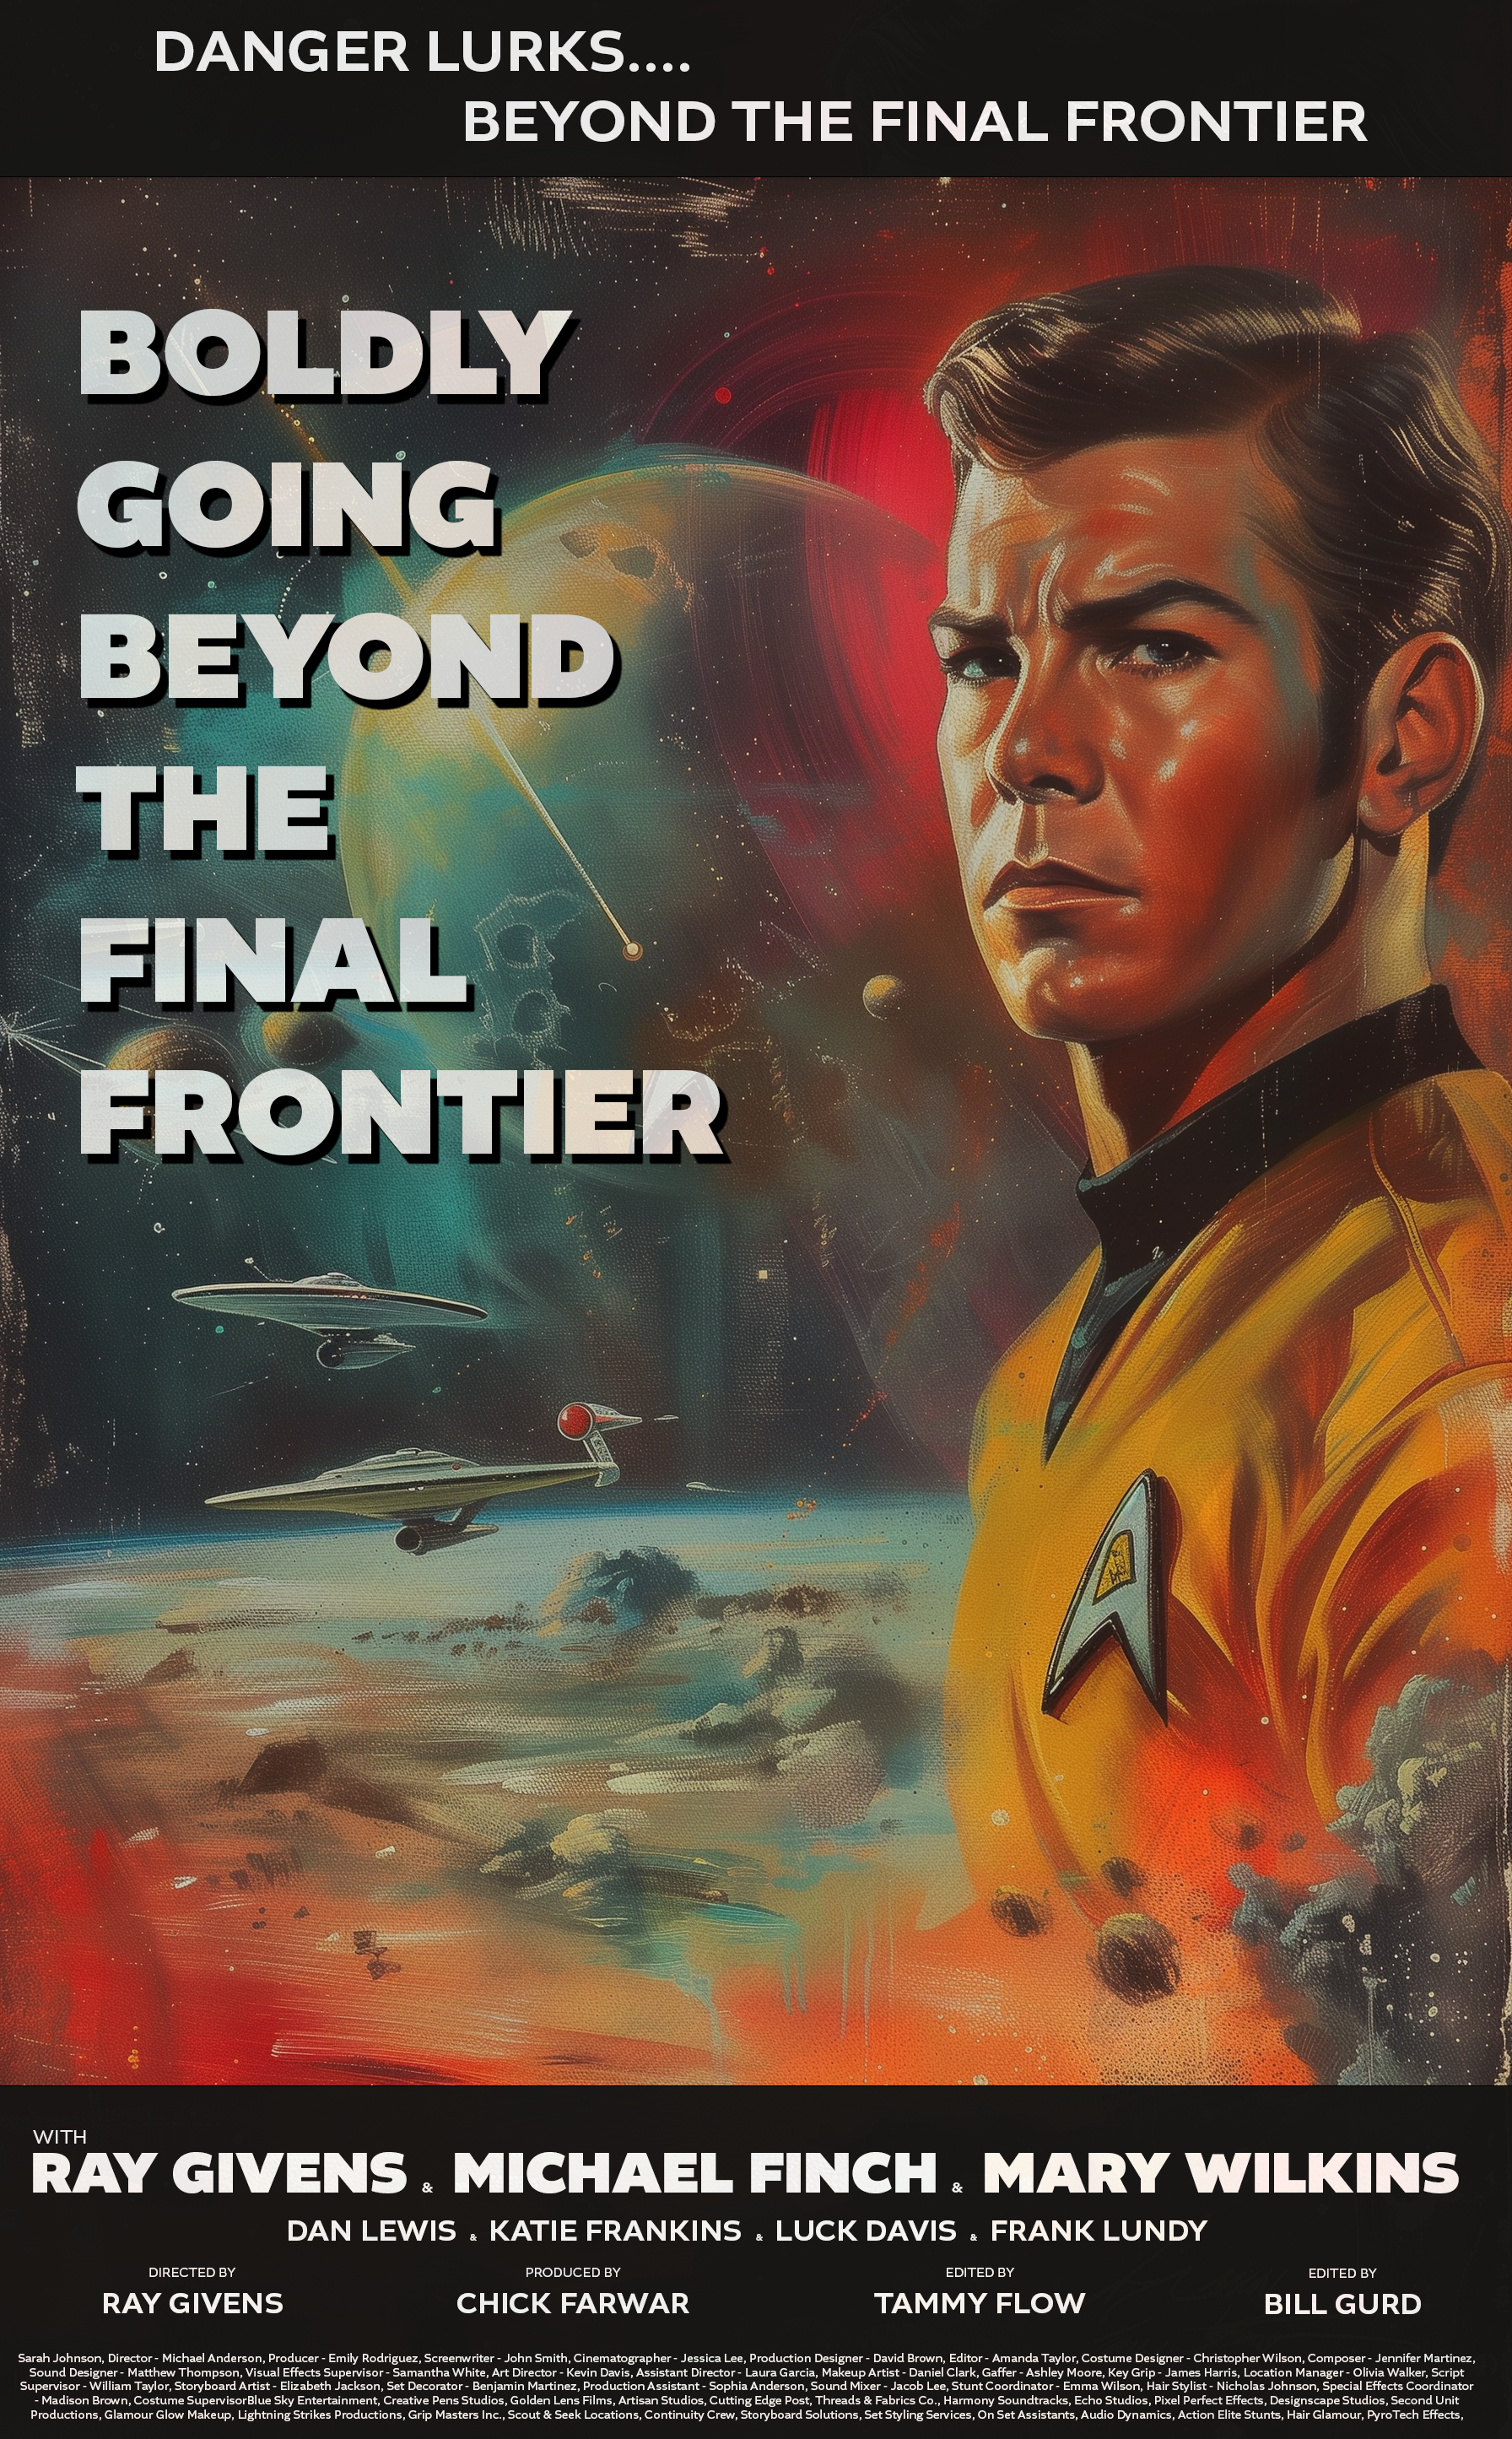 Name:  Beyond the Final Frontier.png
Views: 150
Size:  8.19 MB